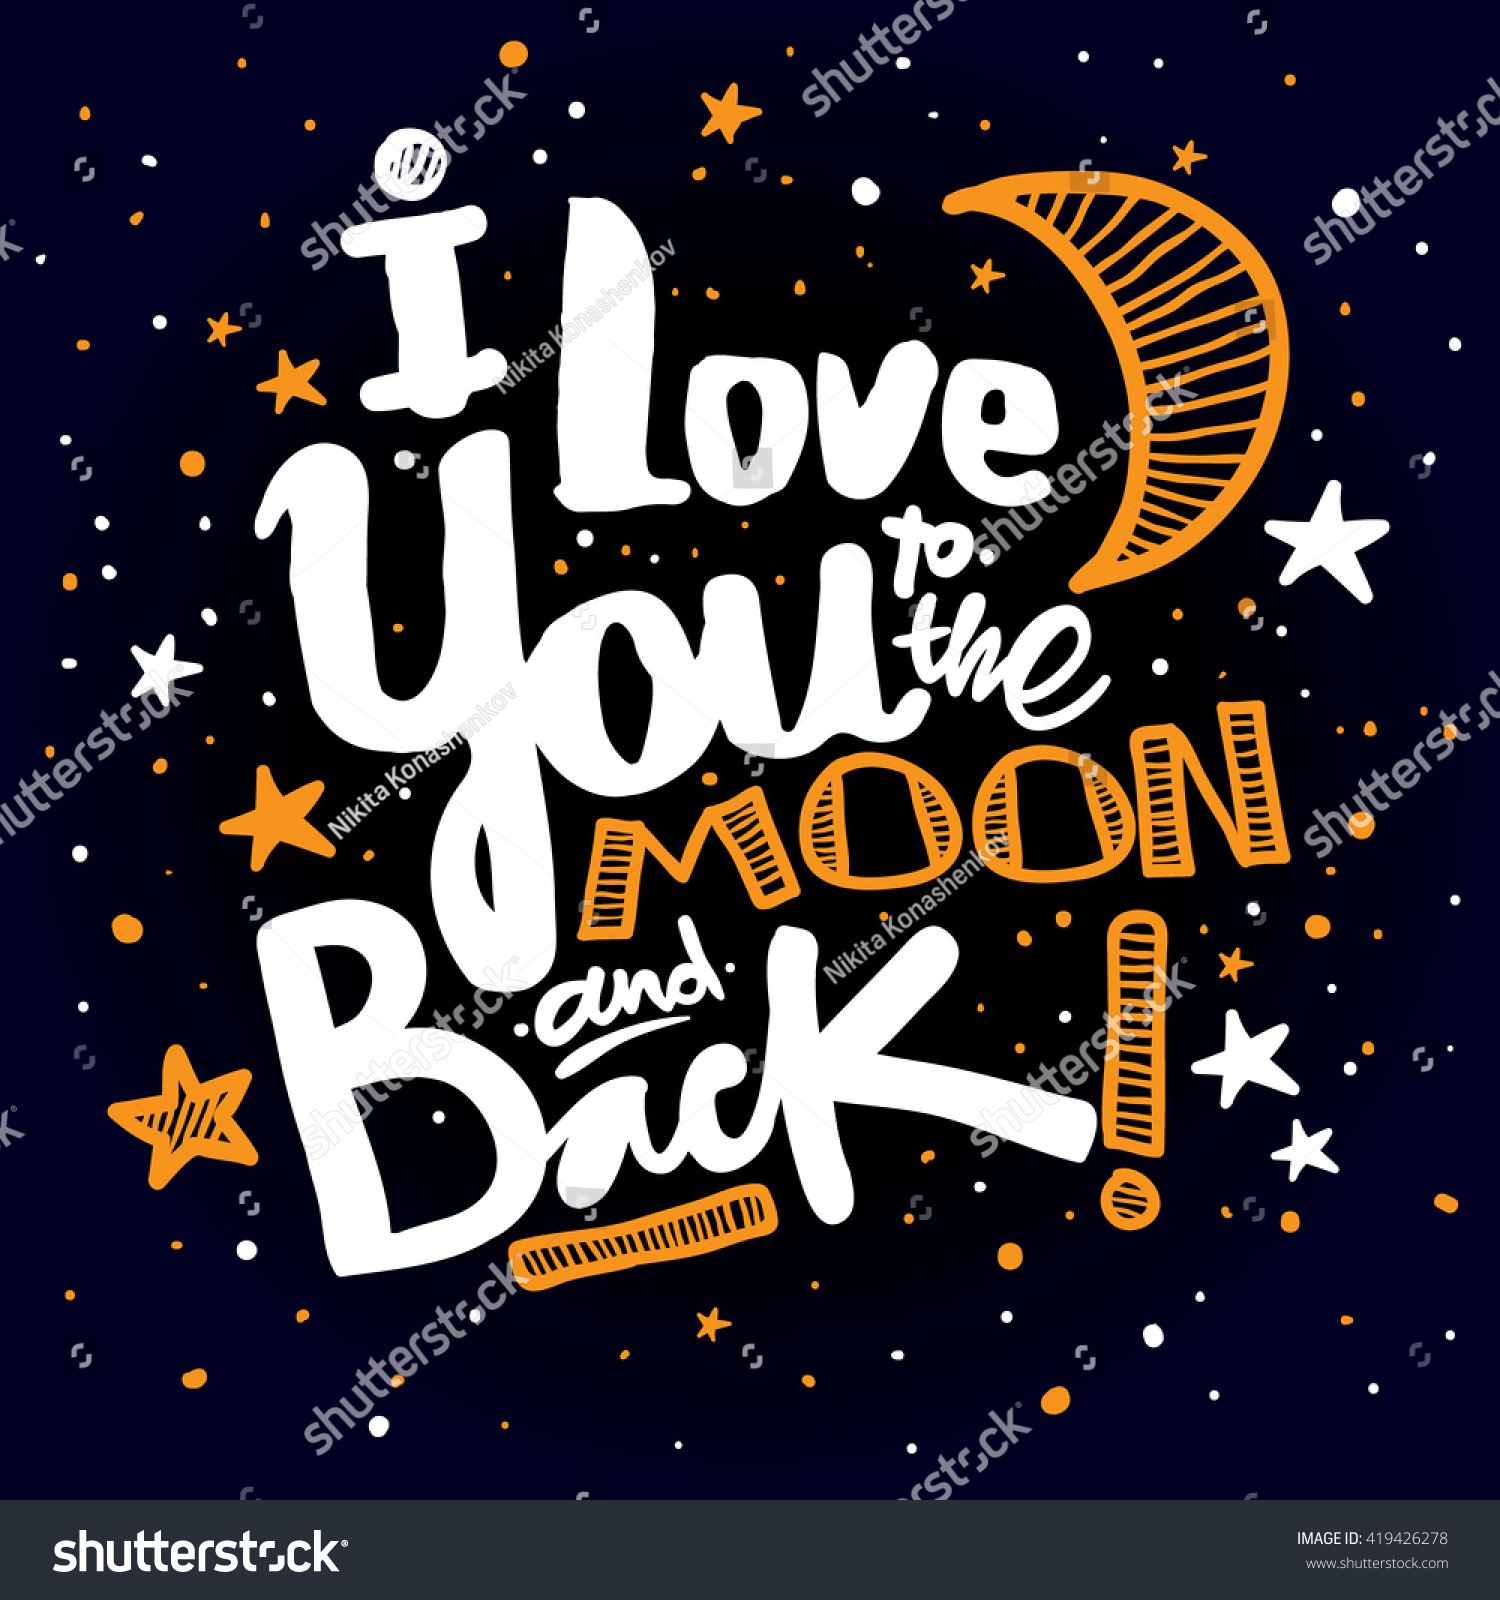 I love you to the moon and back Hand drawn poster with a romantic quote